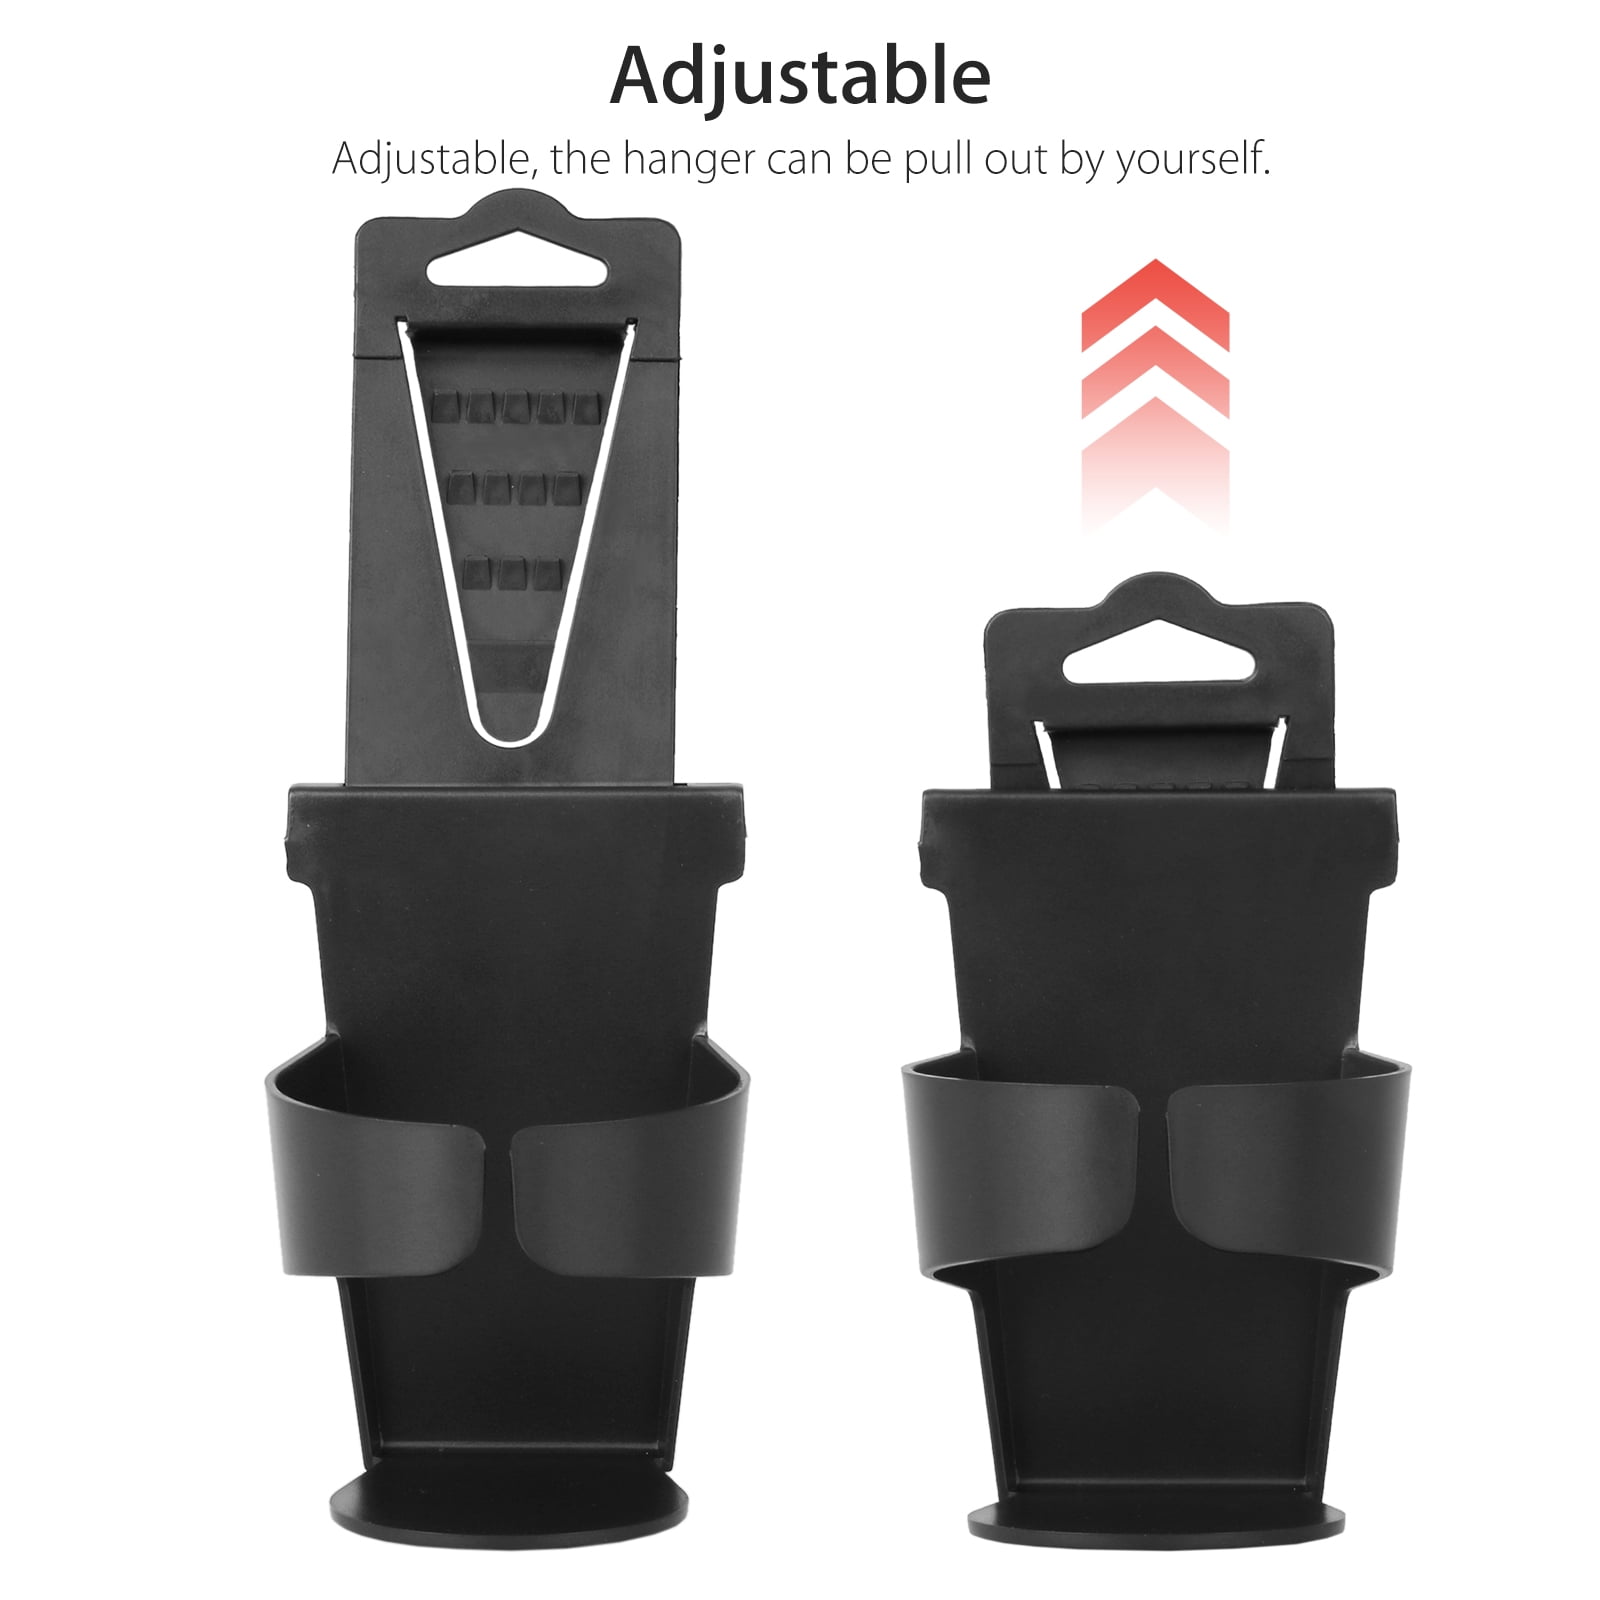 LA TALUS 2 in 1 Auto Car Seat Cup Holder Water Bottle Drink Coffee  Adjustable Mount Stand style A One Size 